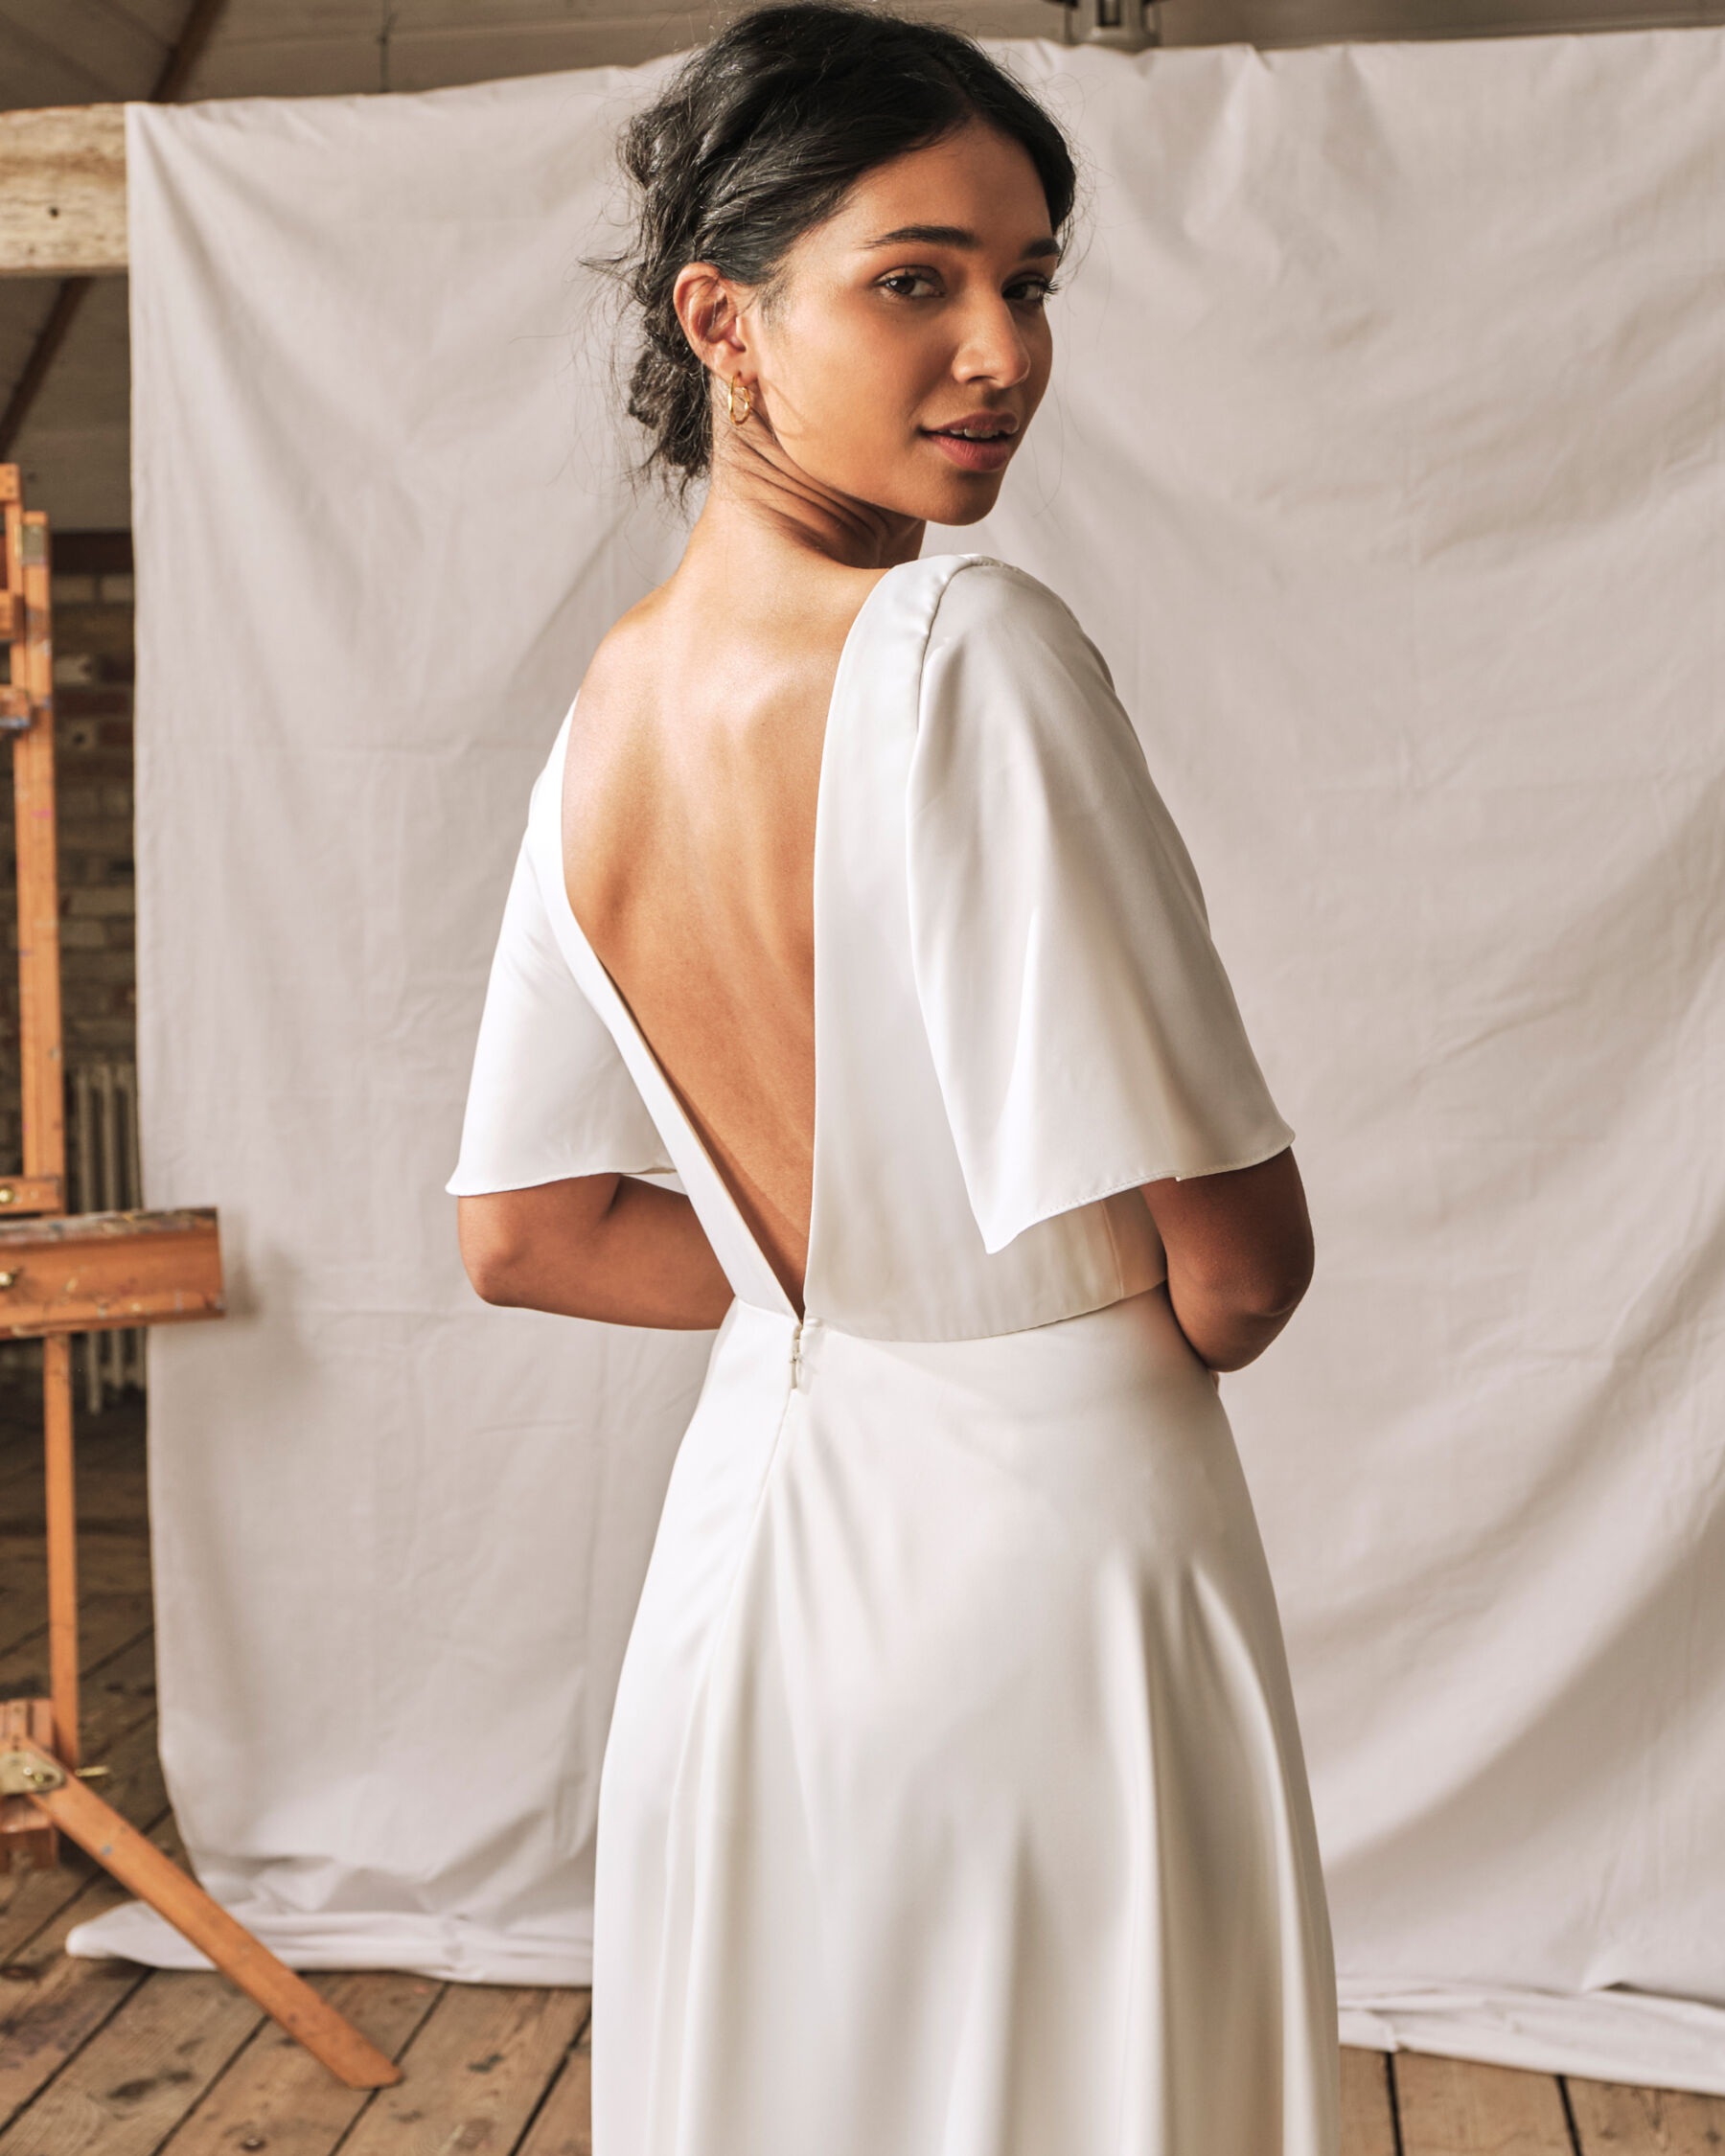 Modern, simple and sustainable wedding dress by Sophie Rose Bridal.